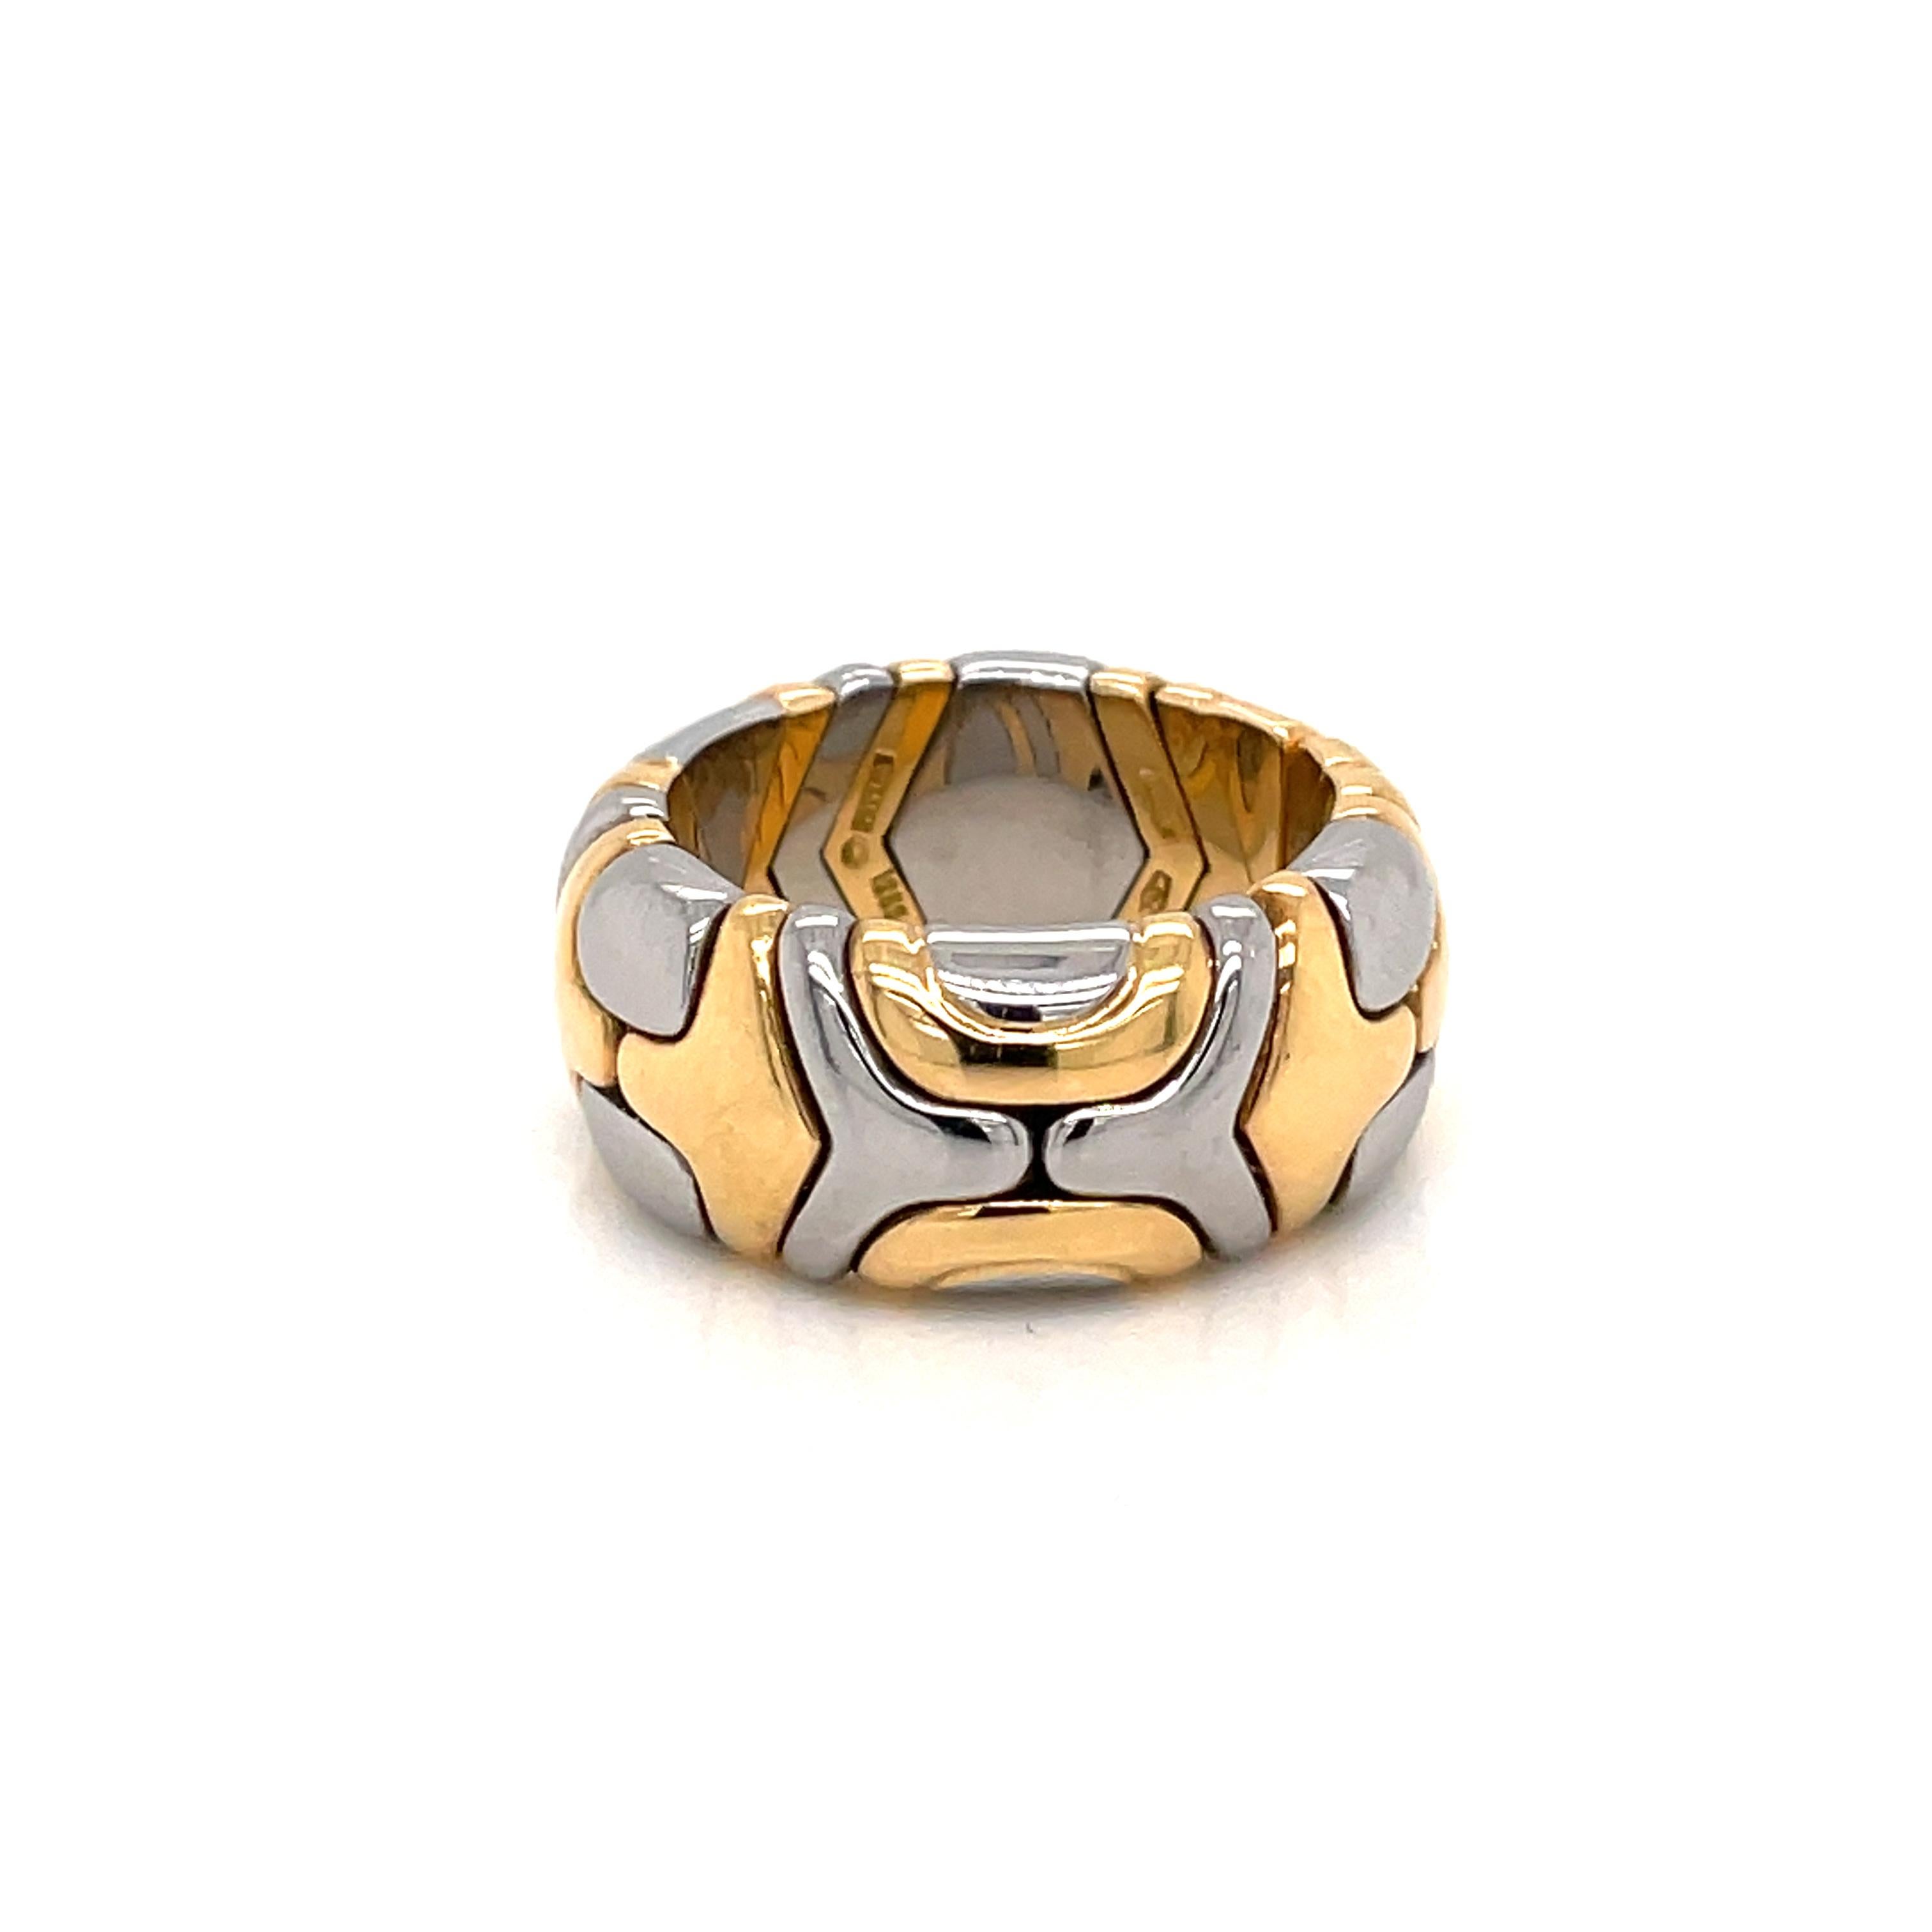 Classic Alveare ring designed by Bvlgari.

A geometric flexible Alveare ring band, crafted in Rome Italy by the house of Bulgari in two tones of solid yellow 18 k gold and steel. Dated 1980'.

Has a total weight of 12 grams. The actual size is 6,